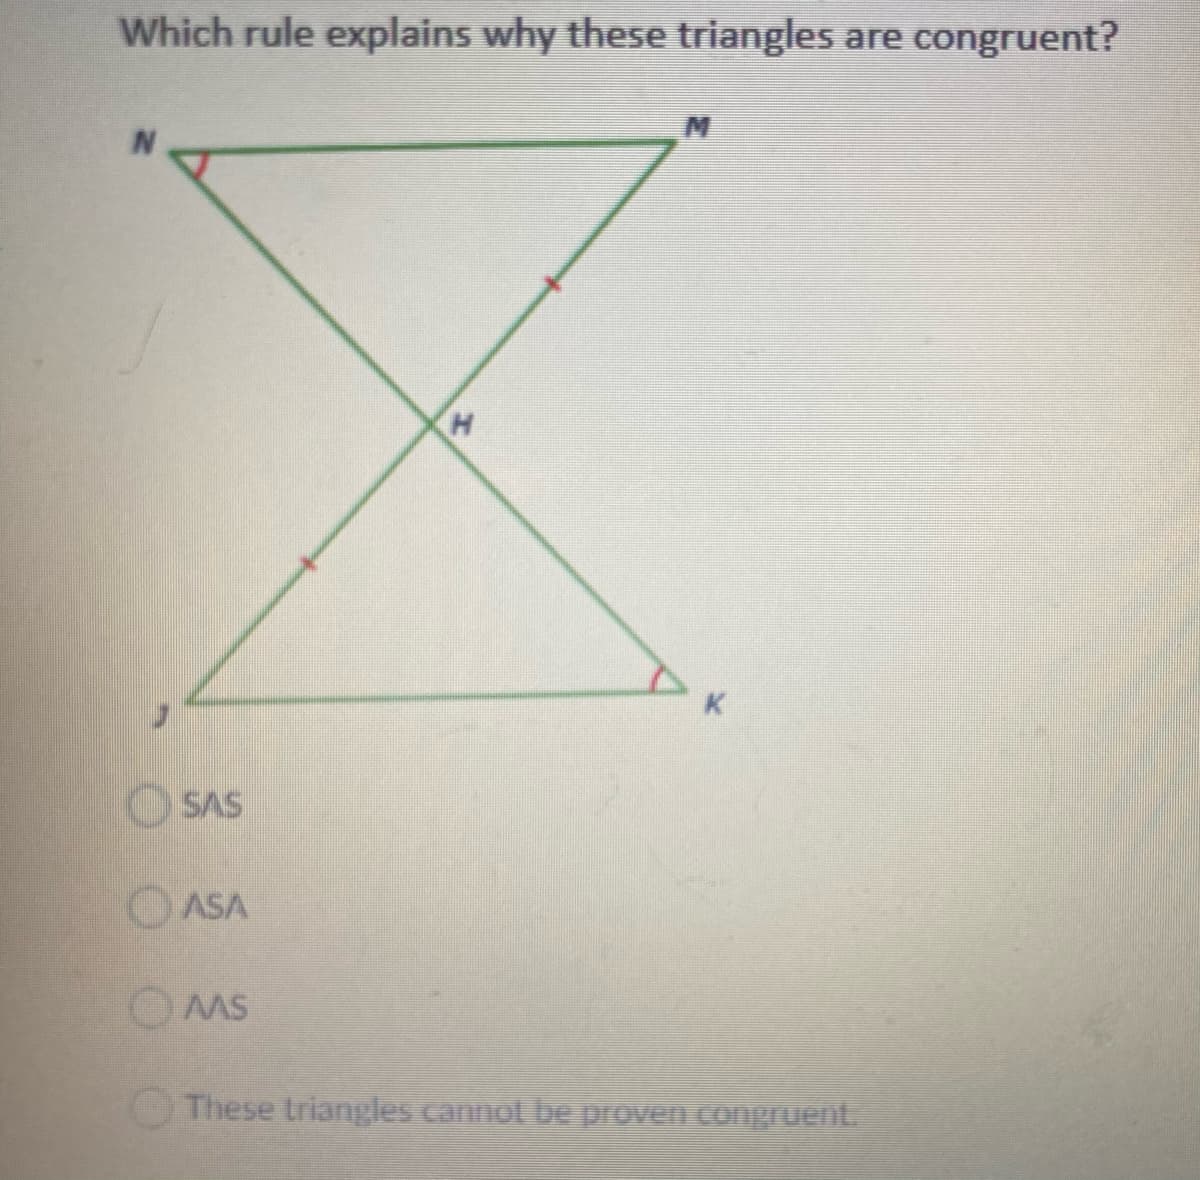 Which rule explains why these triangles are congruent?
DK
SAS
OASA
OMS
These triangles cannot be proven congruent.
